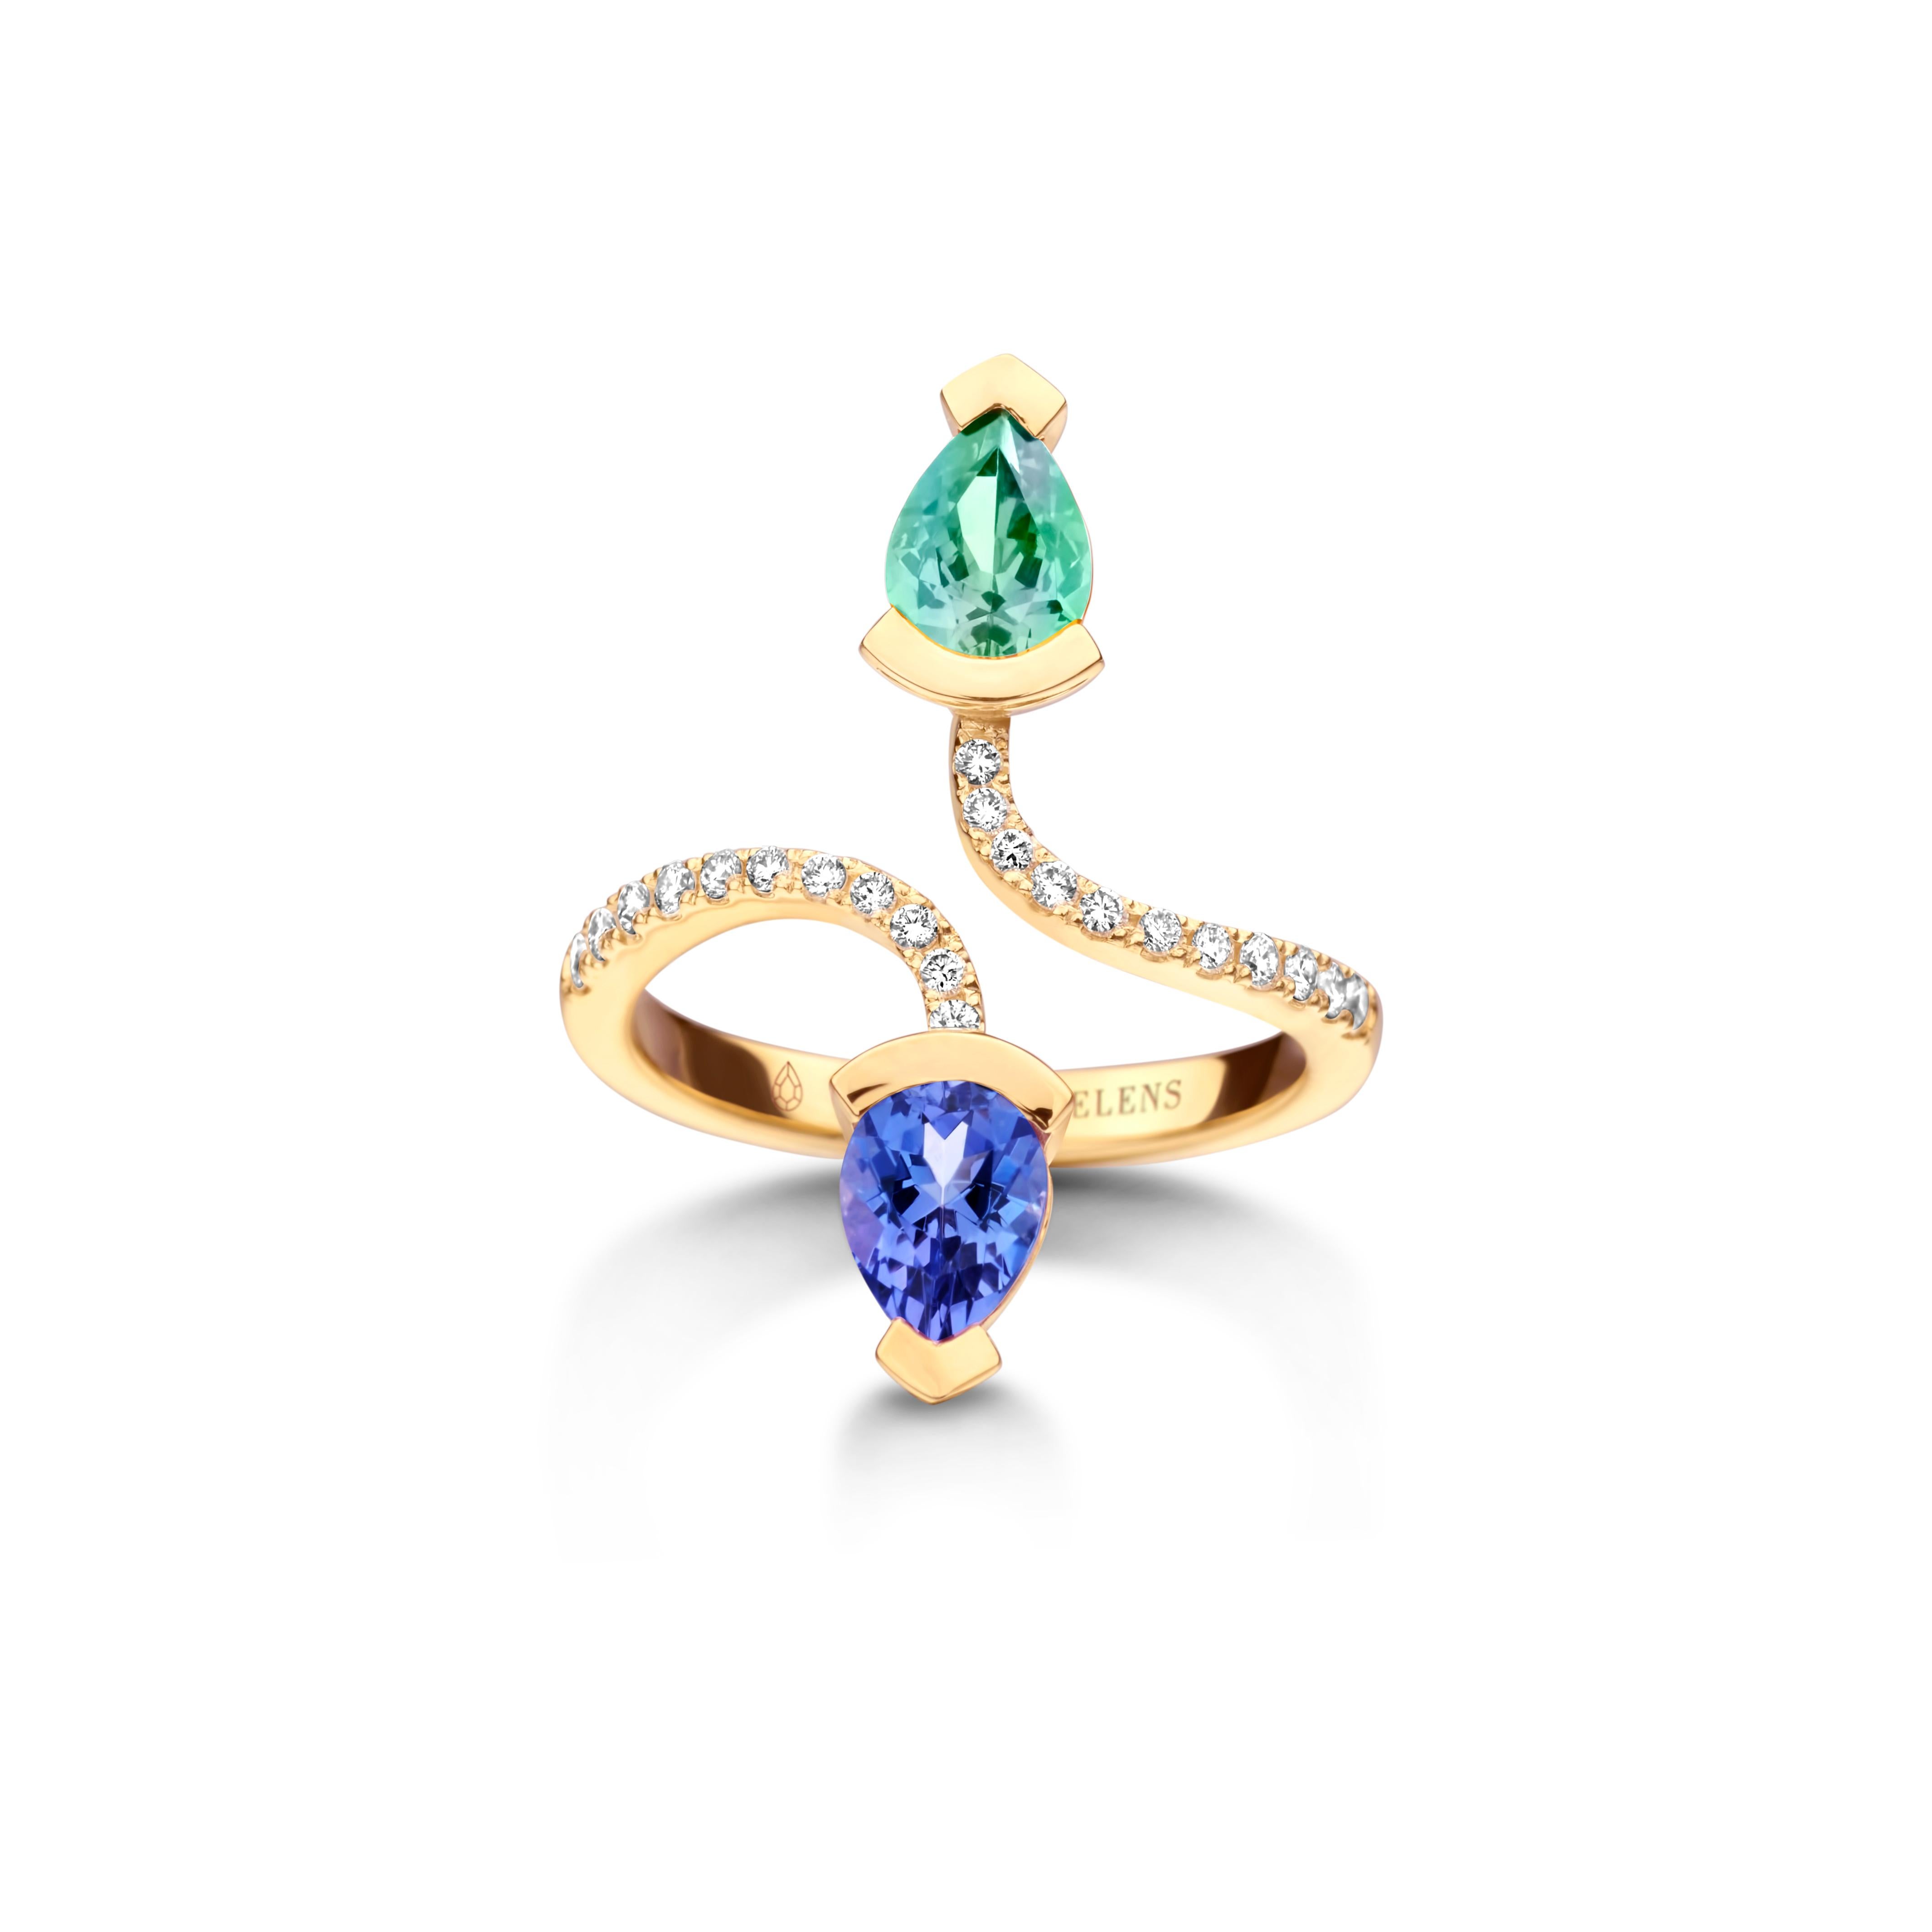 Adeline Duo ring in 18Kt white gold 5g set with a pear-shaped mint tourmaline 0,70 Ct, a pear-shaped Tanzanite 0,70 Ct and 0,19 Ct of white brilliant cut diamonds - VS F quality. Celine Roelens, a goldsmith and gemologist, is specialized in unique,